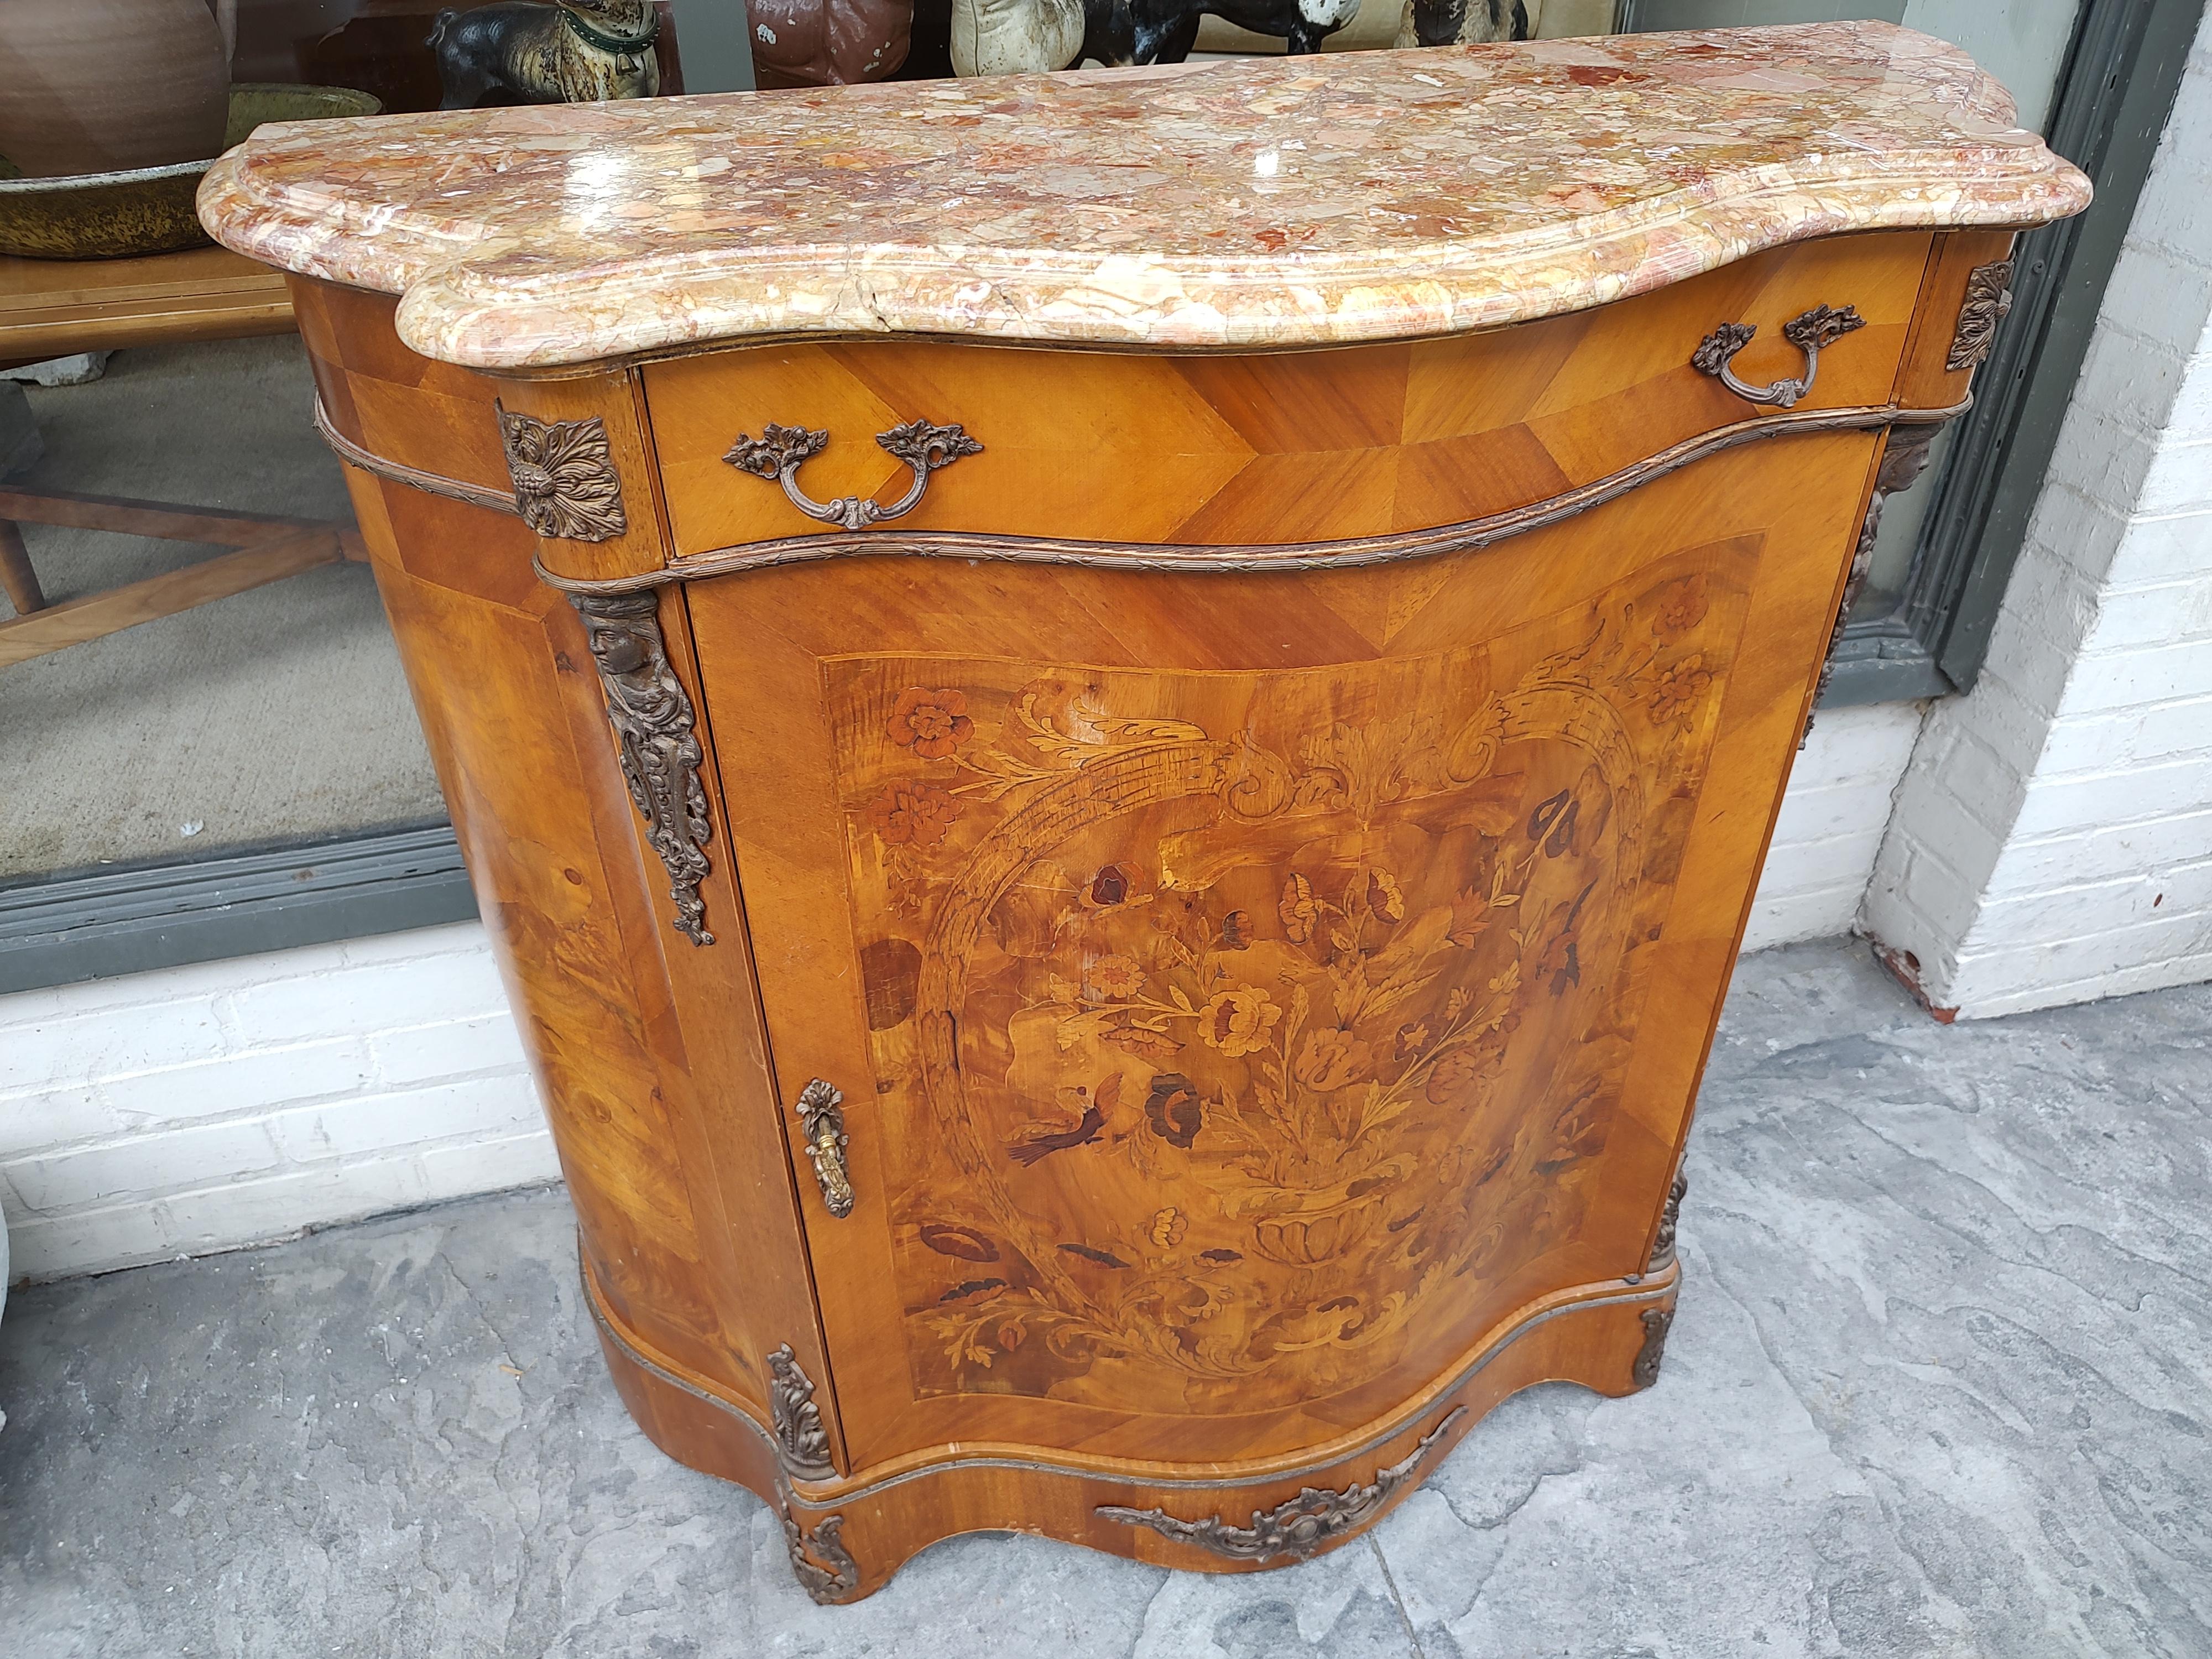 Fabulous marble top cabinet with a serpentine front and a large paneled Marquetry door. Bronze figural mounts, lock with working key. Marble was cracked and repaired, see pics. Interior has a shelf for added storage. In excellent vintage condition